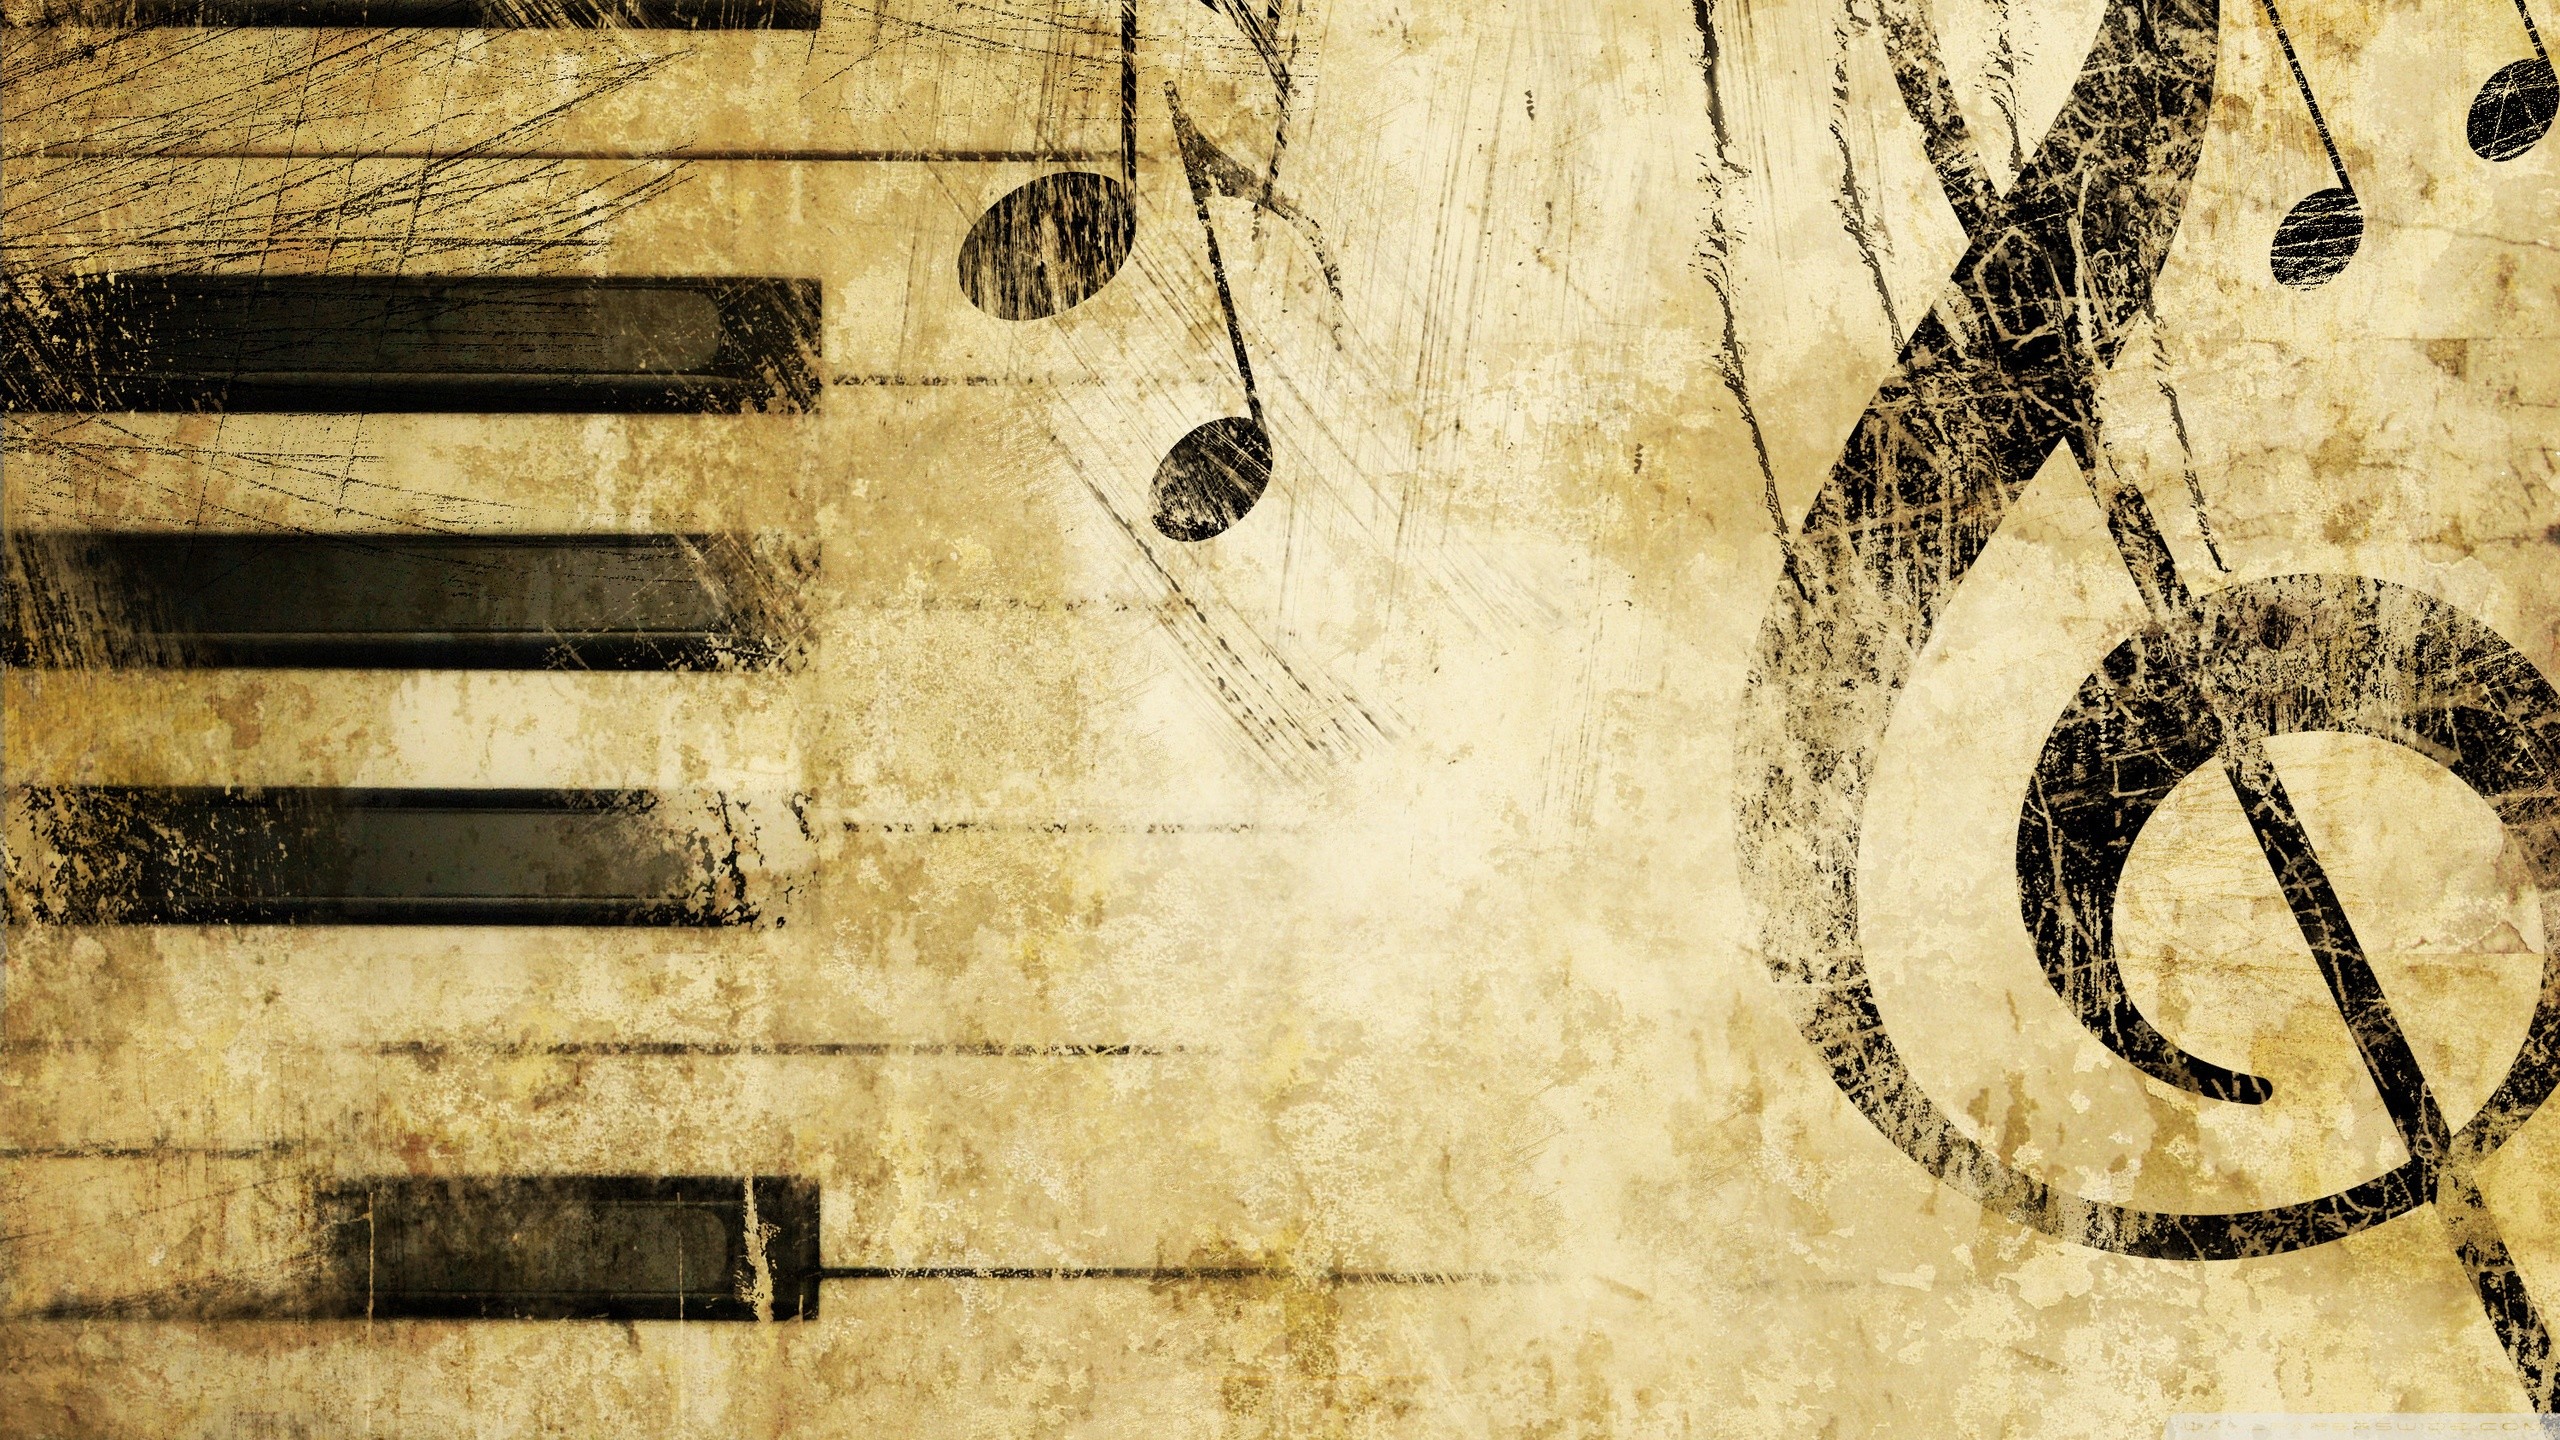 2560x1440 old_music_score_background-wallpaper-